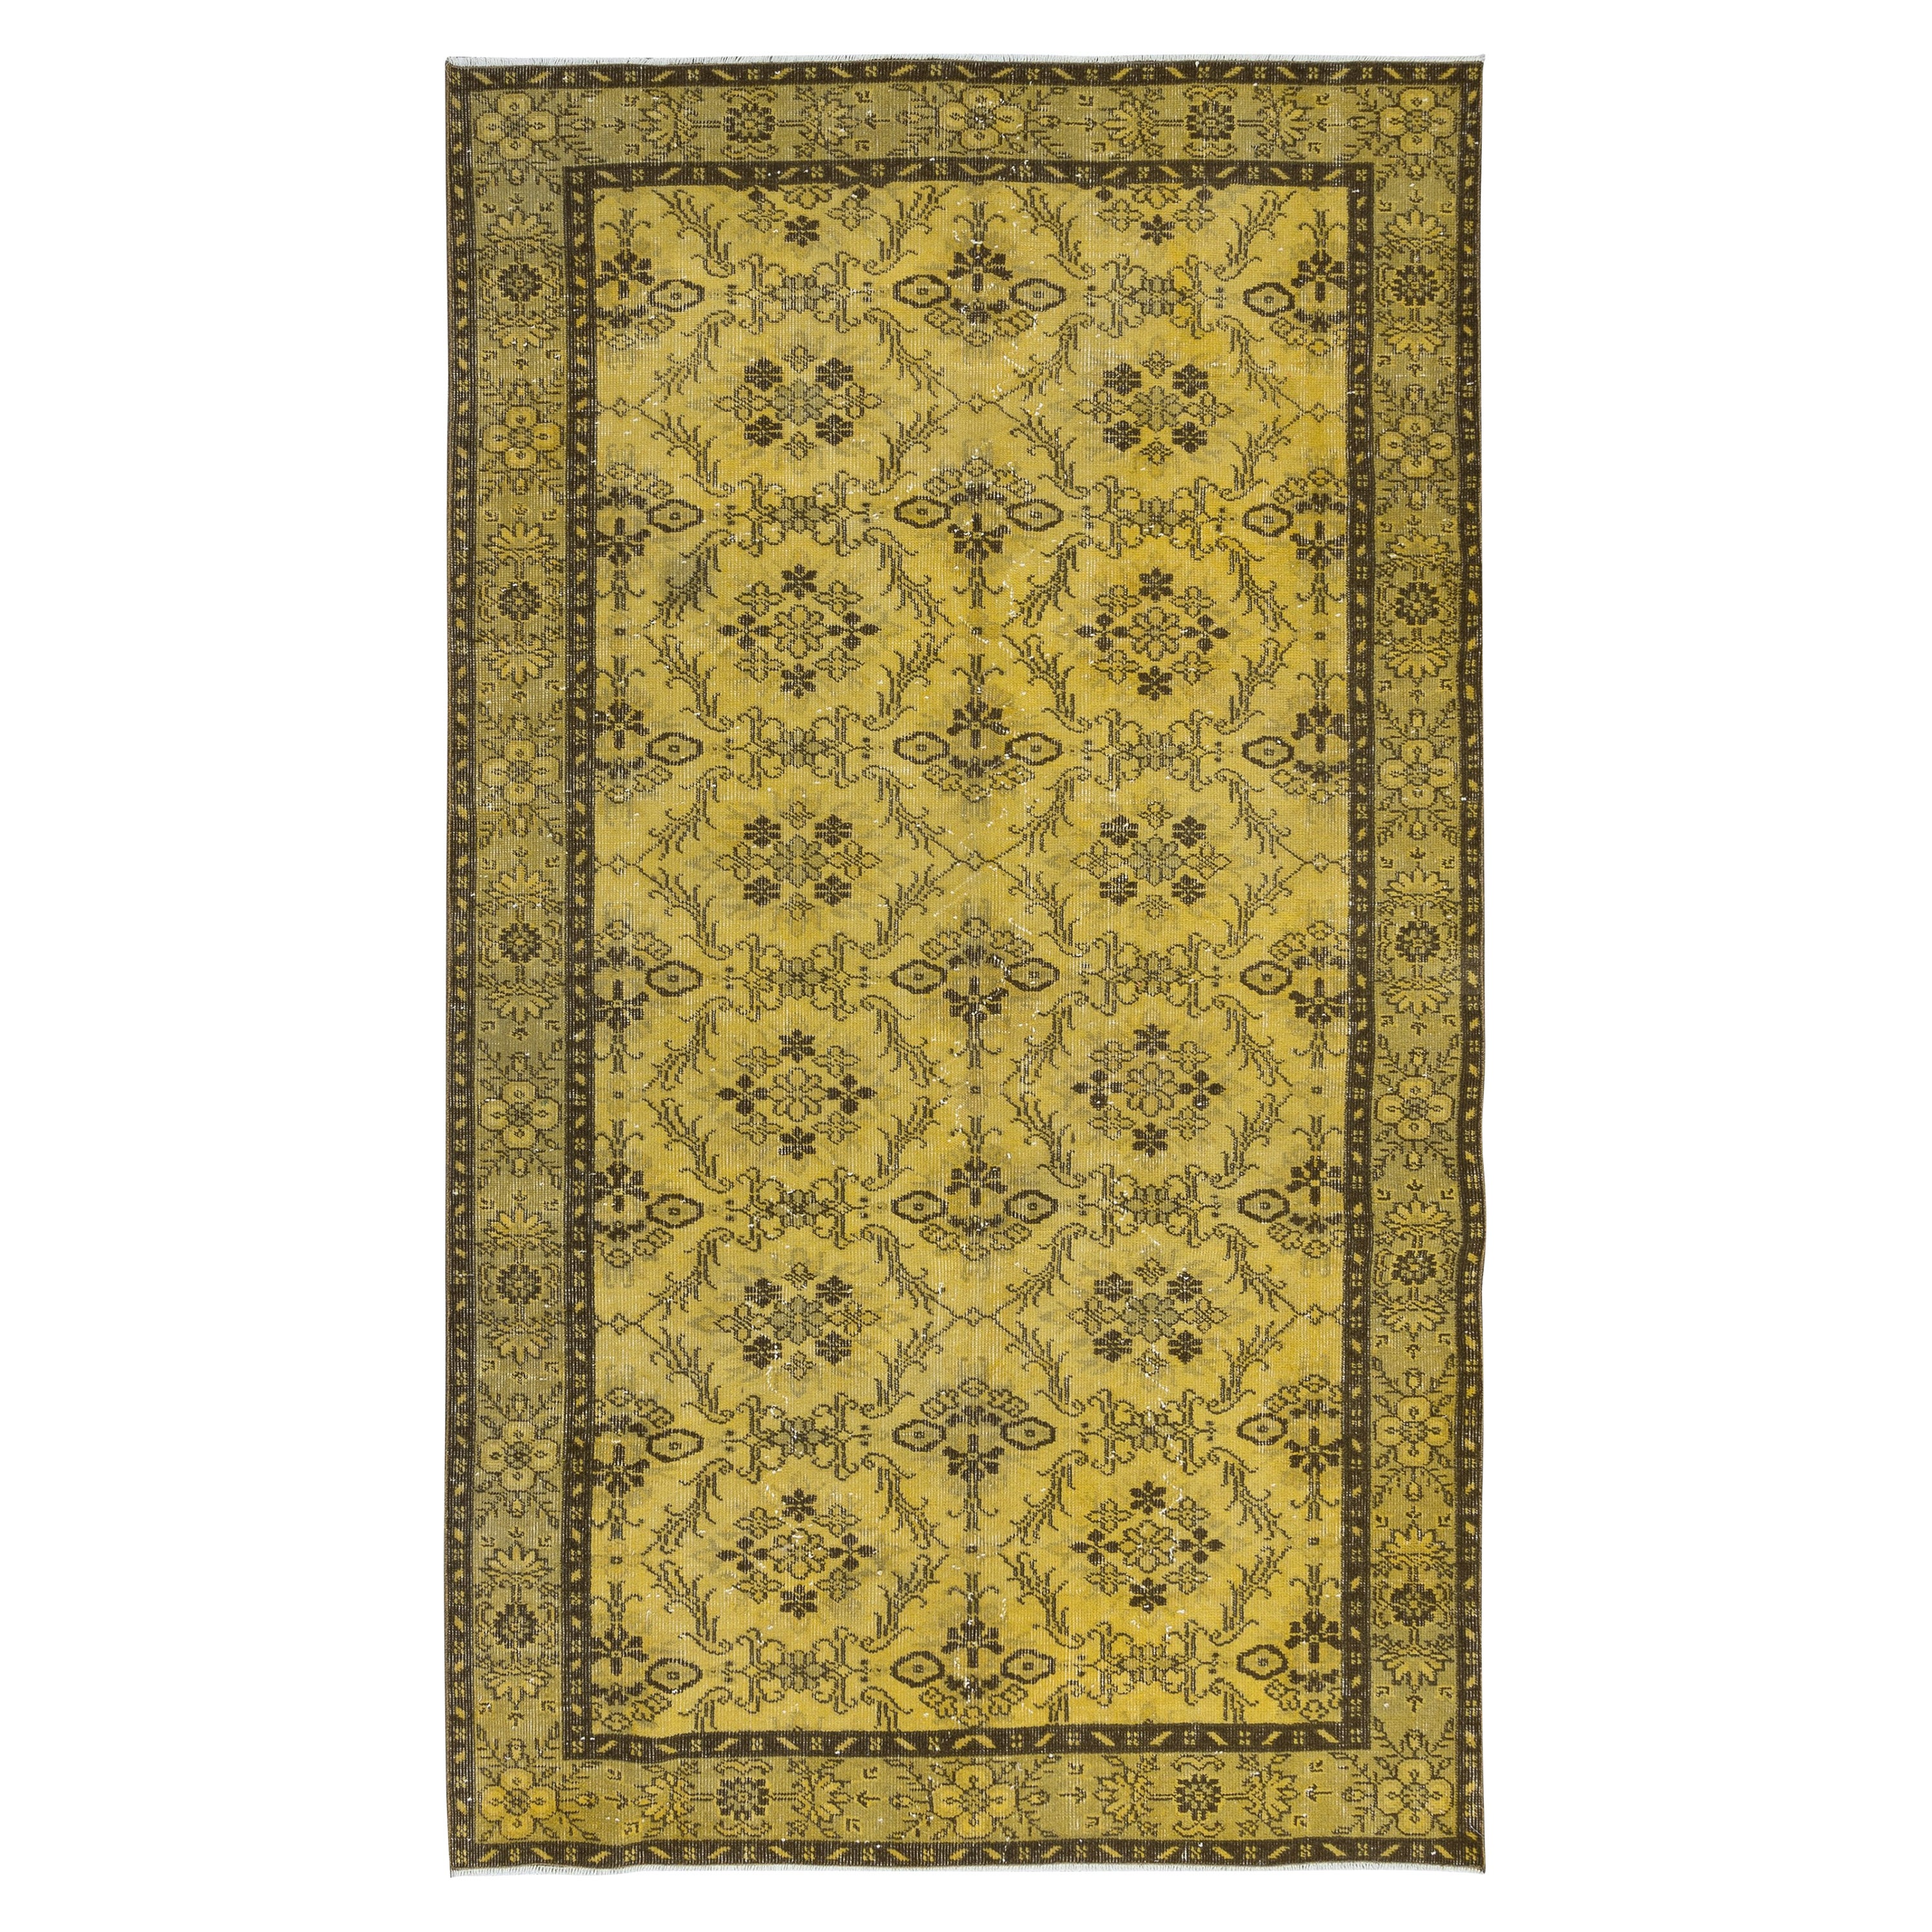 5.4x9 Ft Yellow Turkish Area Rug, Floral Handmade Carpet, Modern Floor Covering For Sale